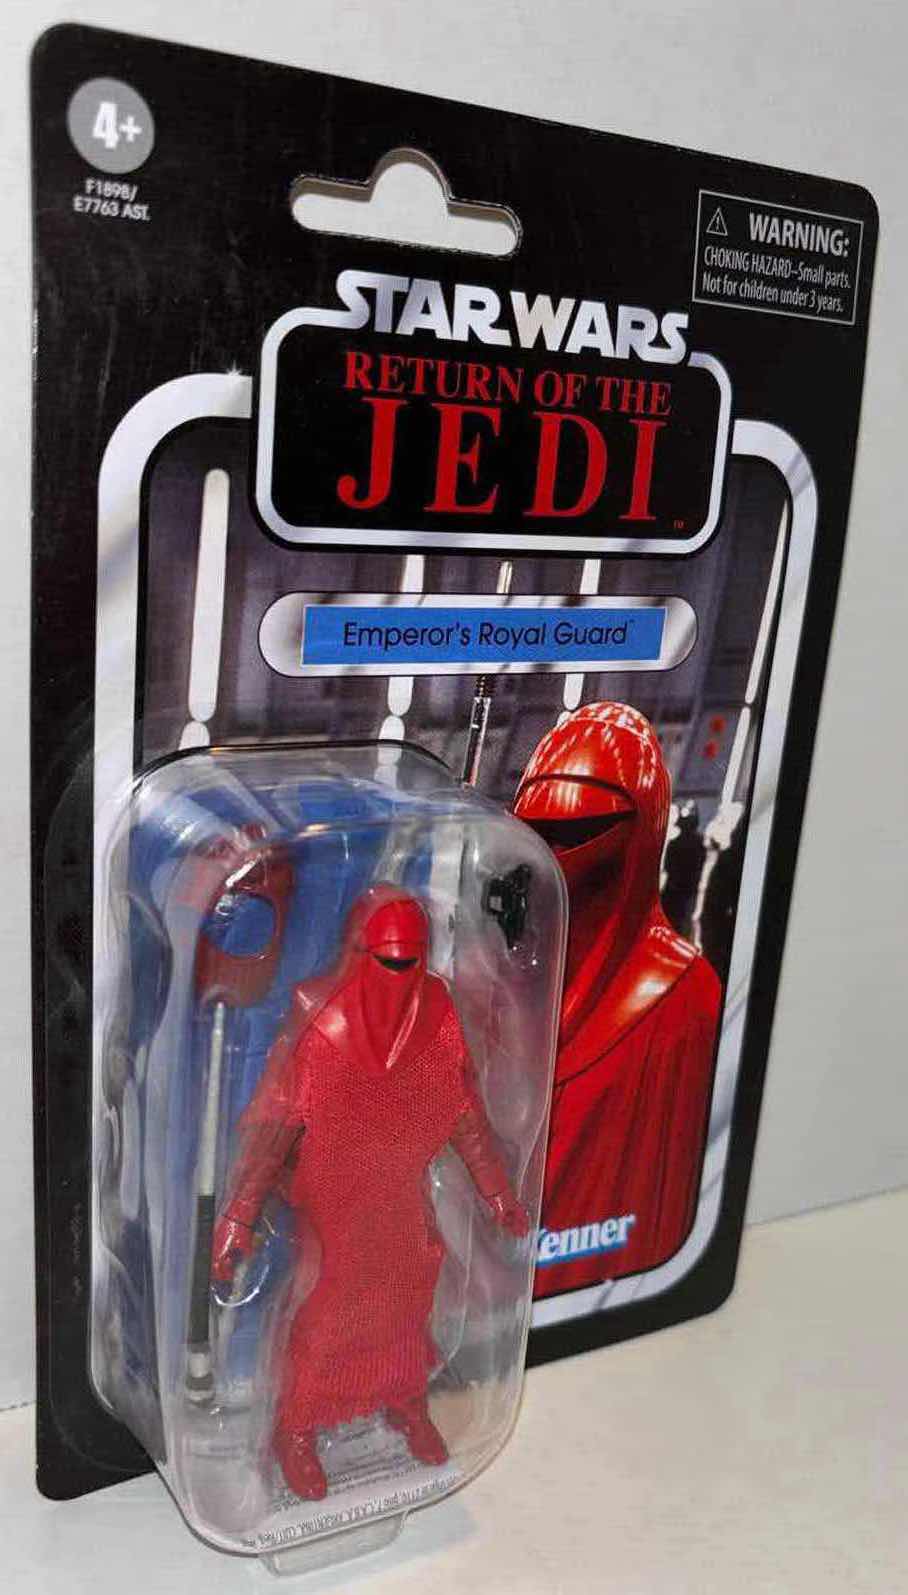 Photo 1 of NEW STAR WARS RETURN OF THE JEDI 3.75” THE VINTAGE COLLECTION ACTION FIGURE & ACCESSORIES, “EMPEROR’S ROYAL GUARD” (1)